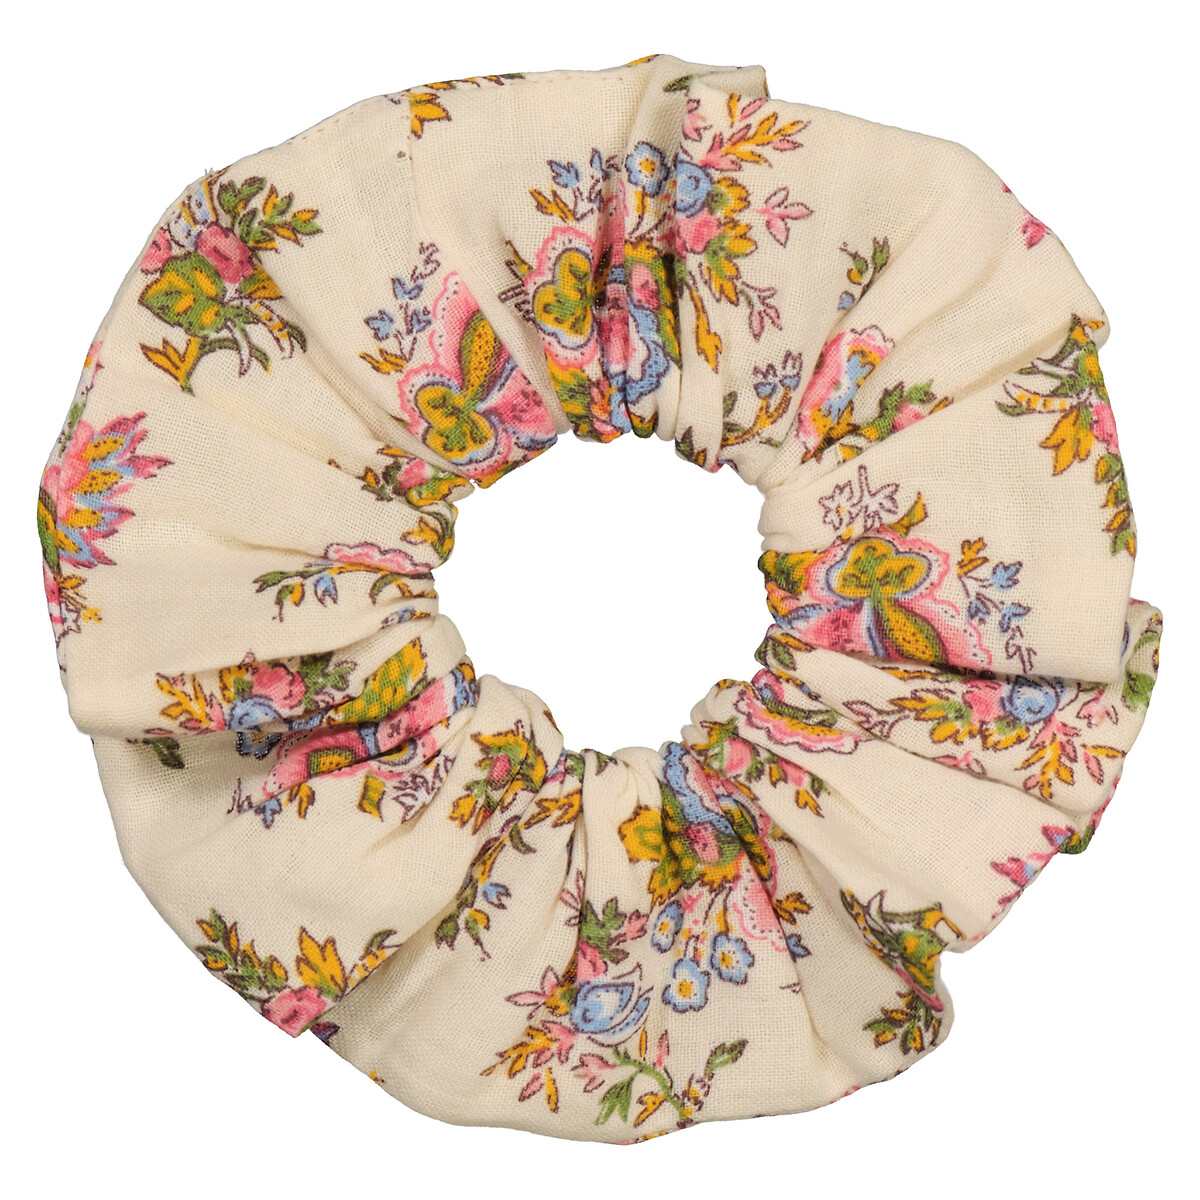 Double Cotton Muslin Scrunchie in Floral Print